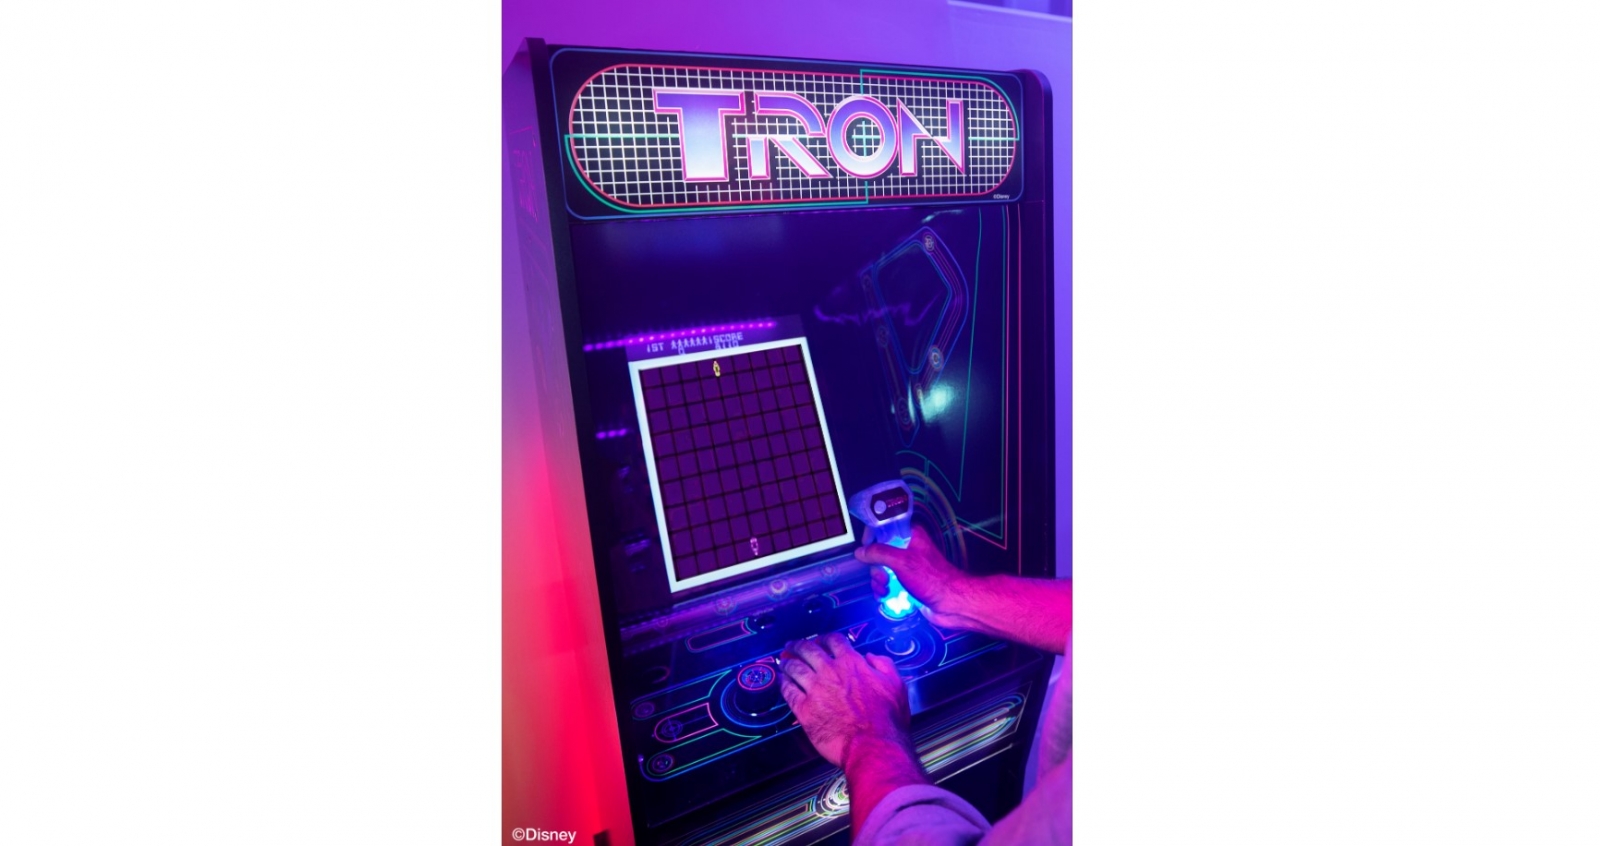 tron arcade game spiders